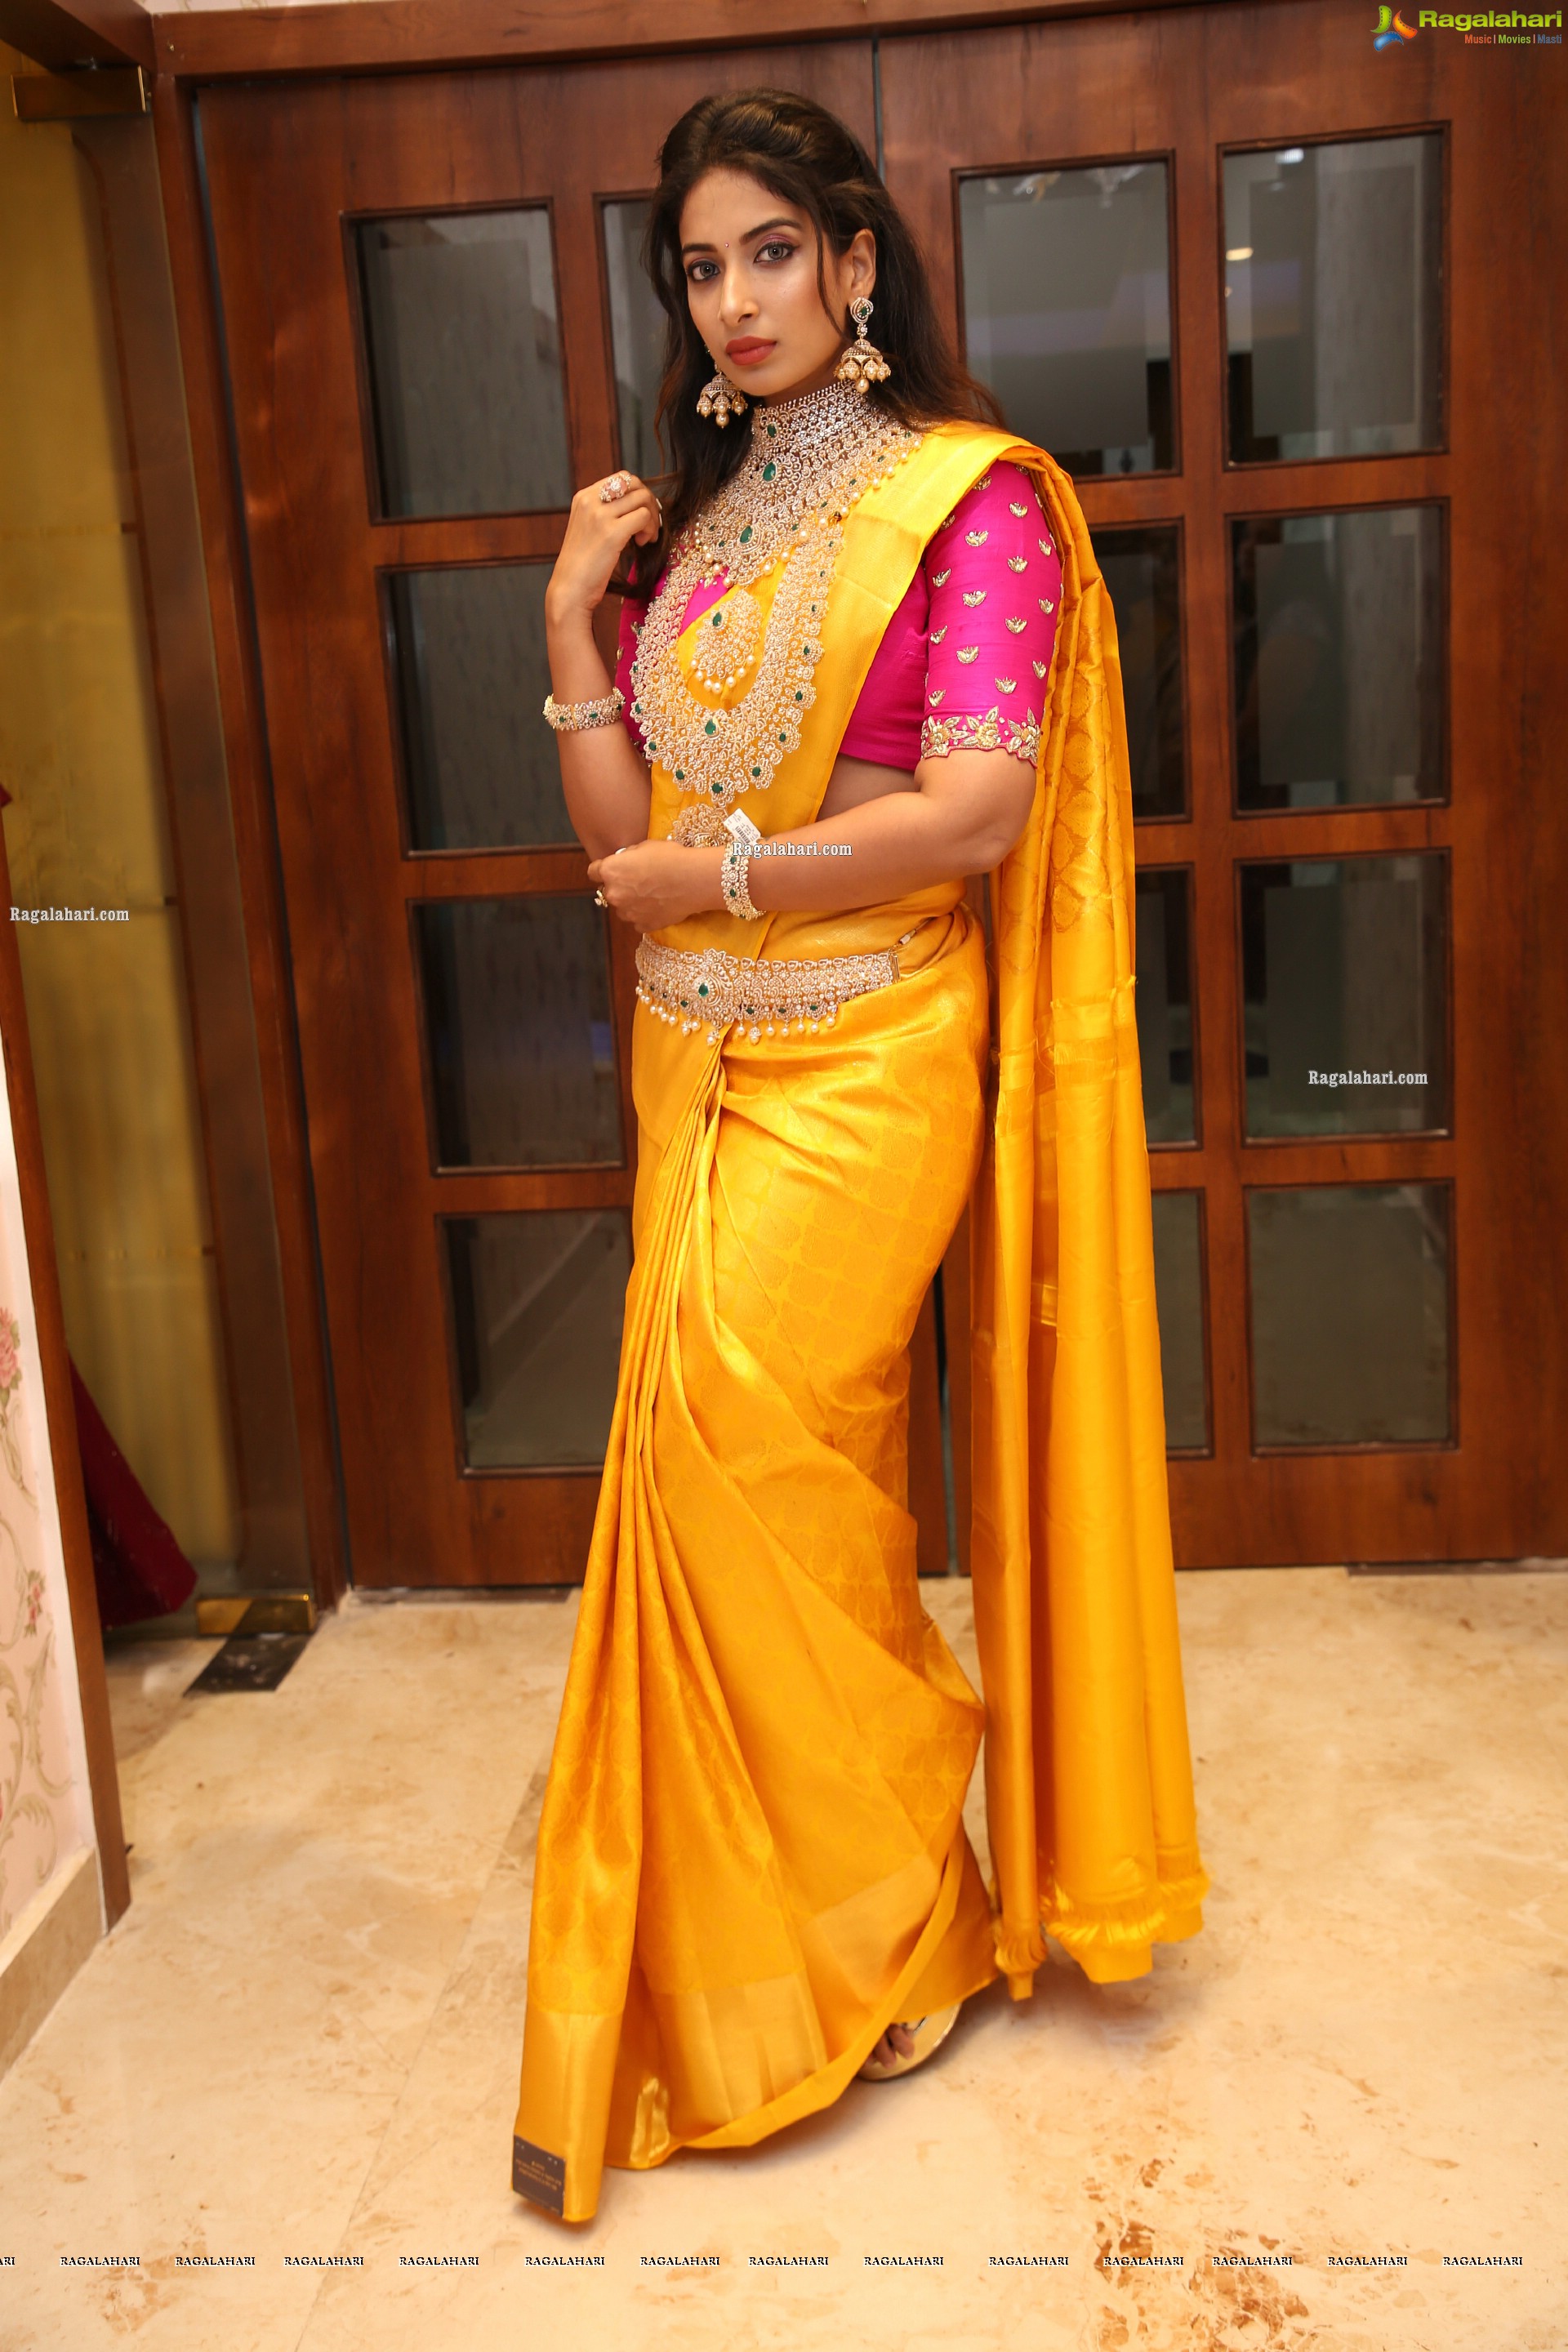 Archana Ravi Poses With Gold Jewellery, HD Photo Gallery